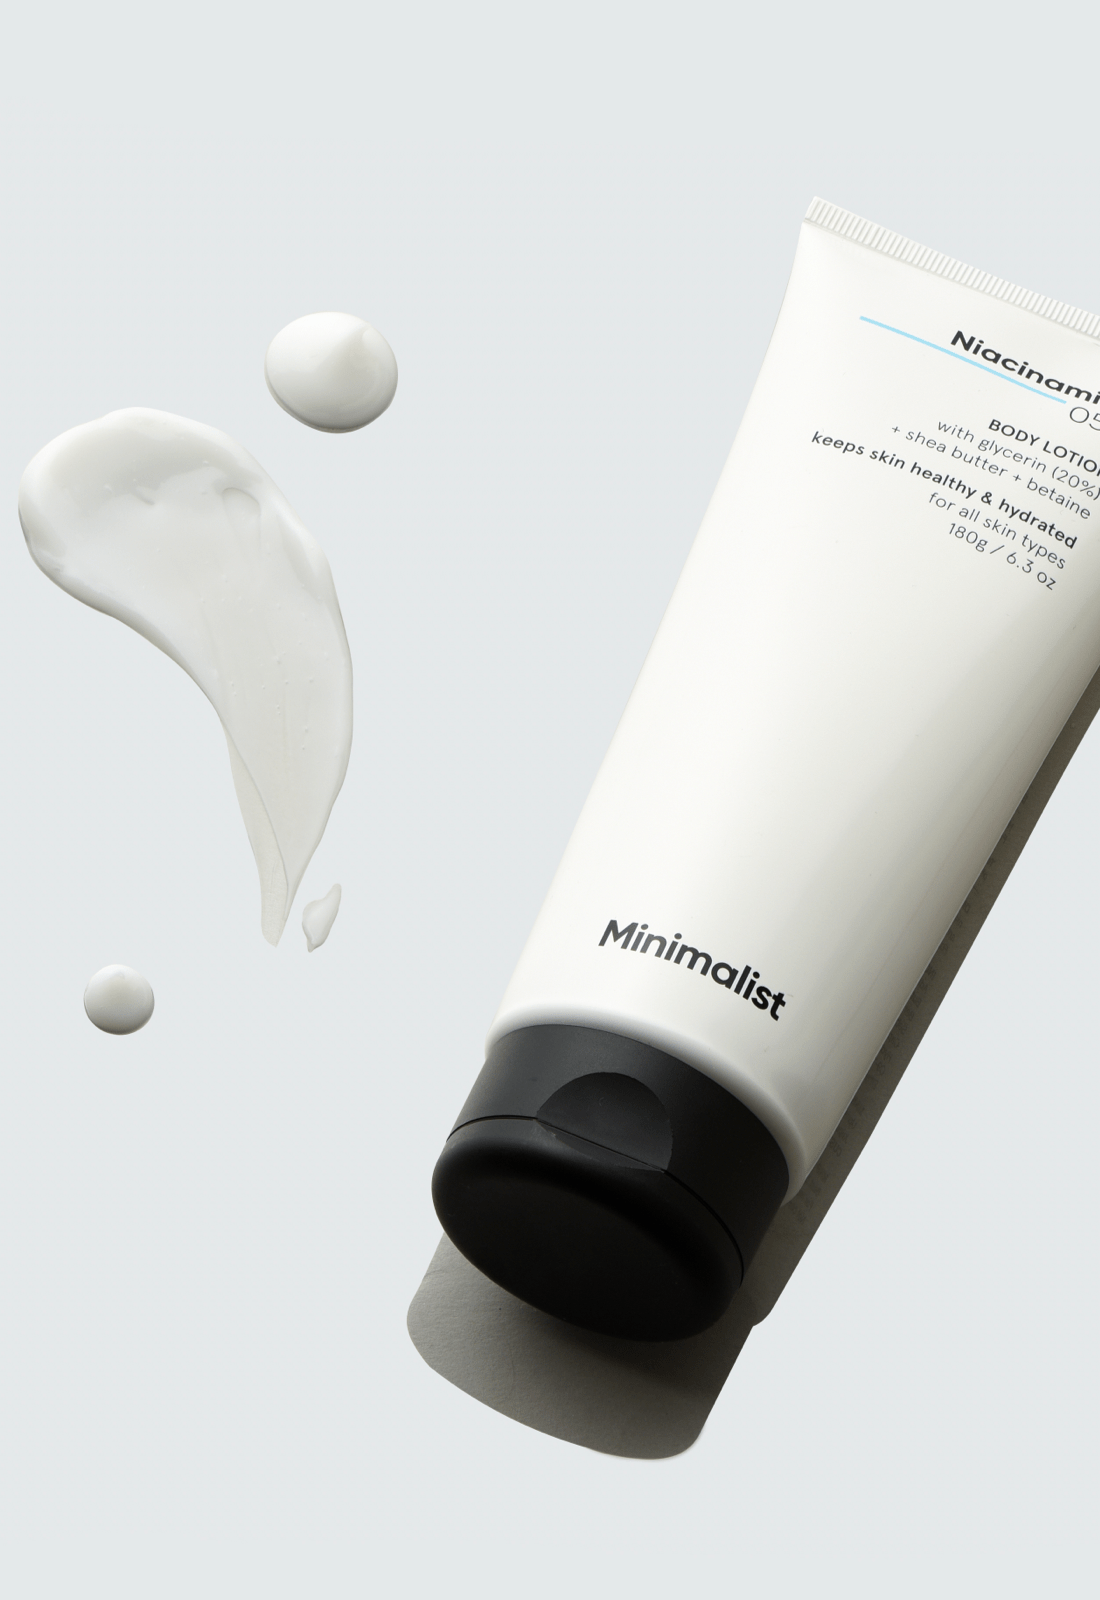 Niacinamide 05% Body Lotion for keeping your body hydrated & nourished -  With benefits of Glycerin, Betaine, & Shea Butter